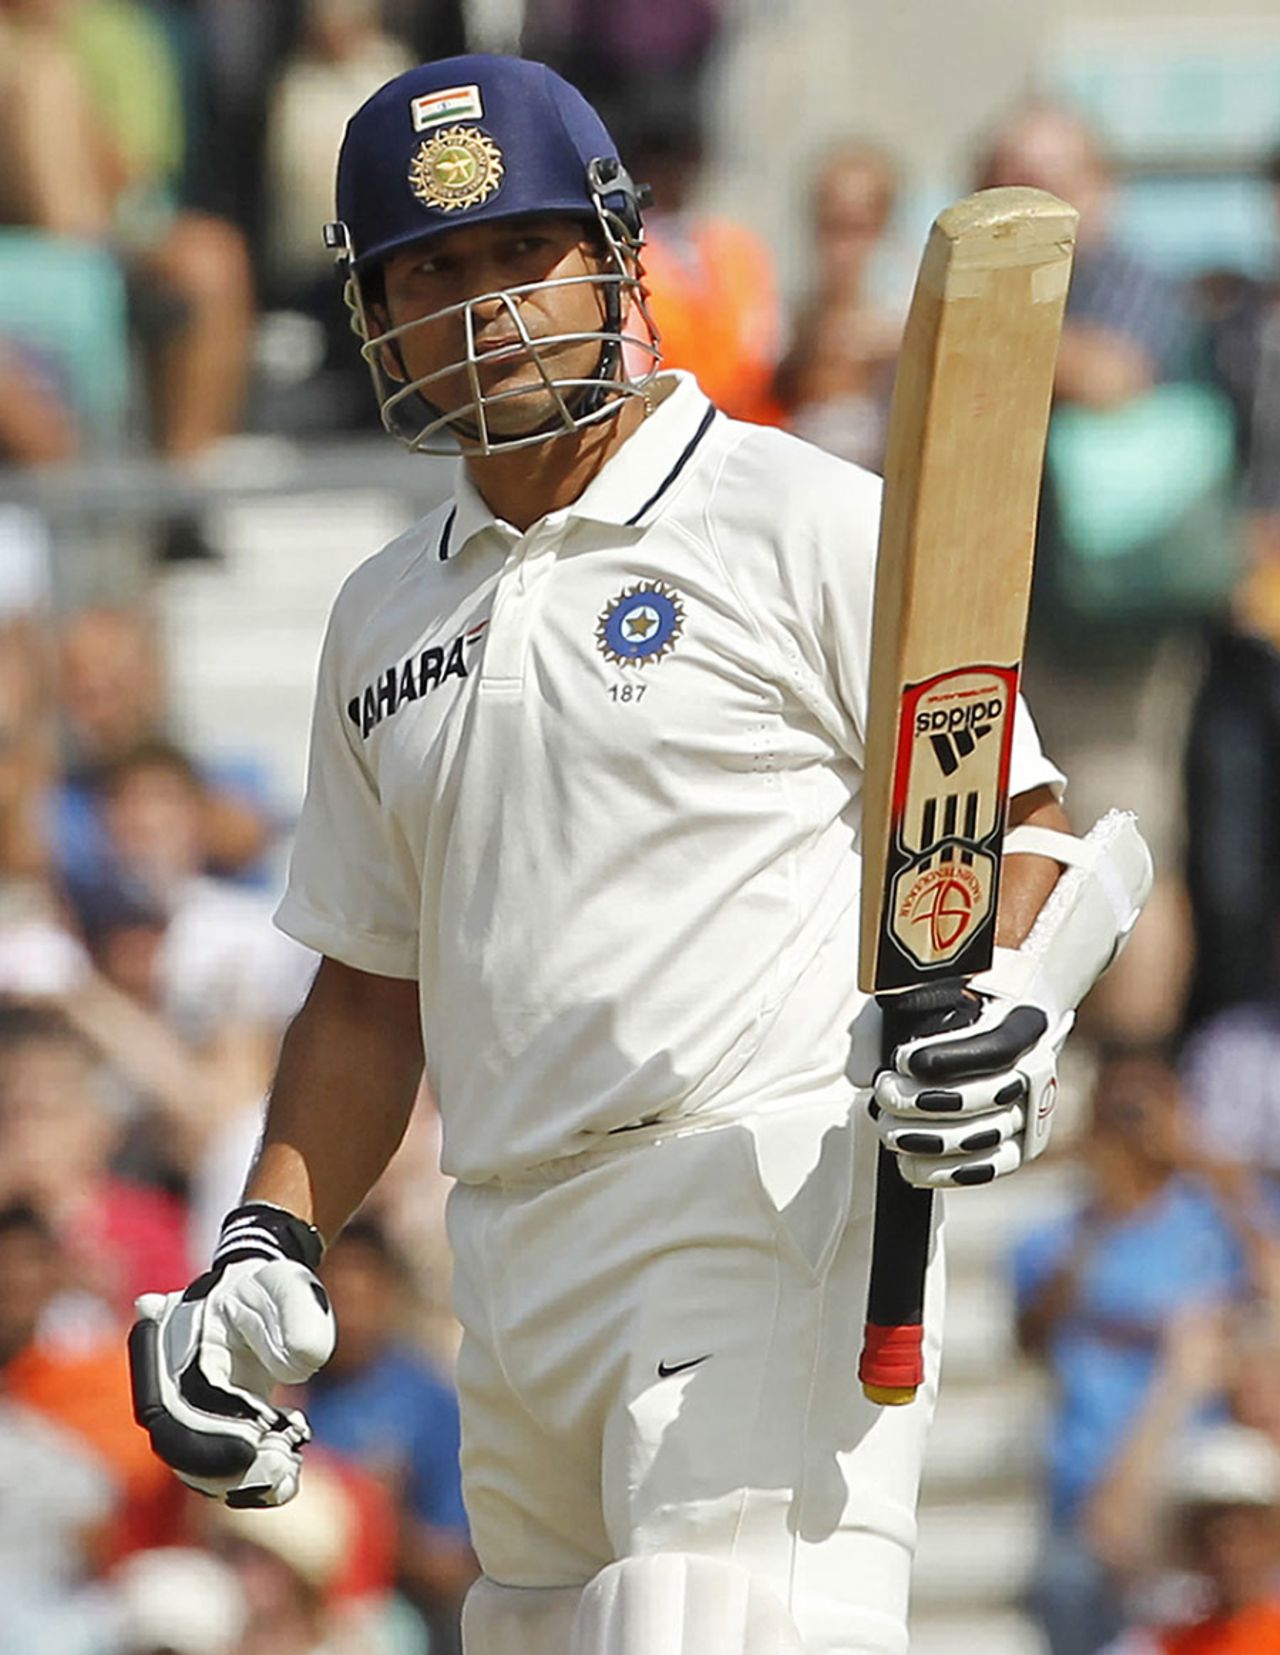 Sachin Tendulkar acknowledges the applause on getting to a fifty, England v India, 4th Test, The Oval, 5th day, August 22, 2011